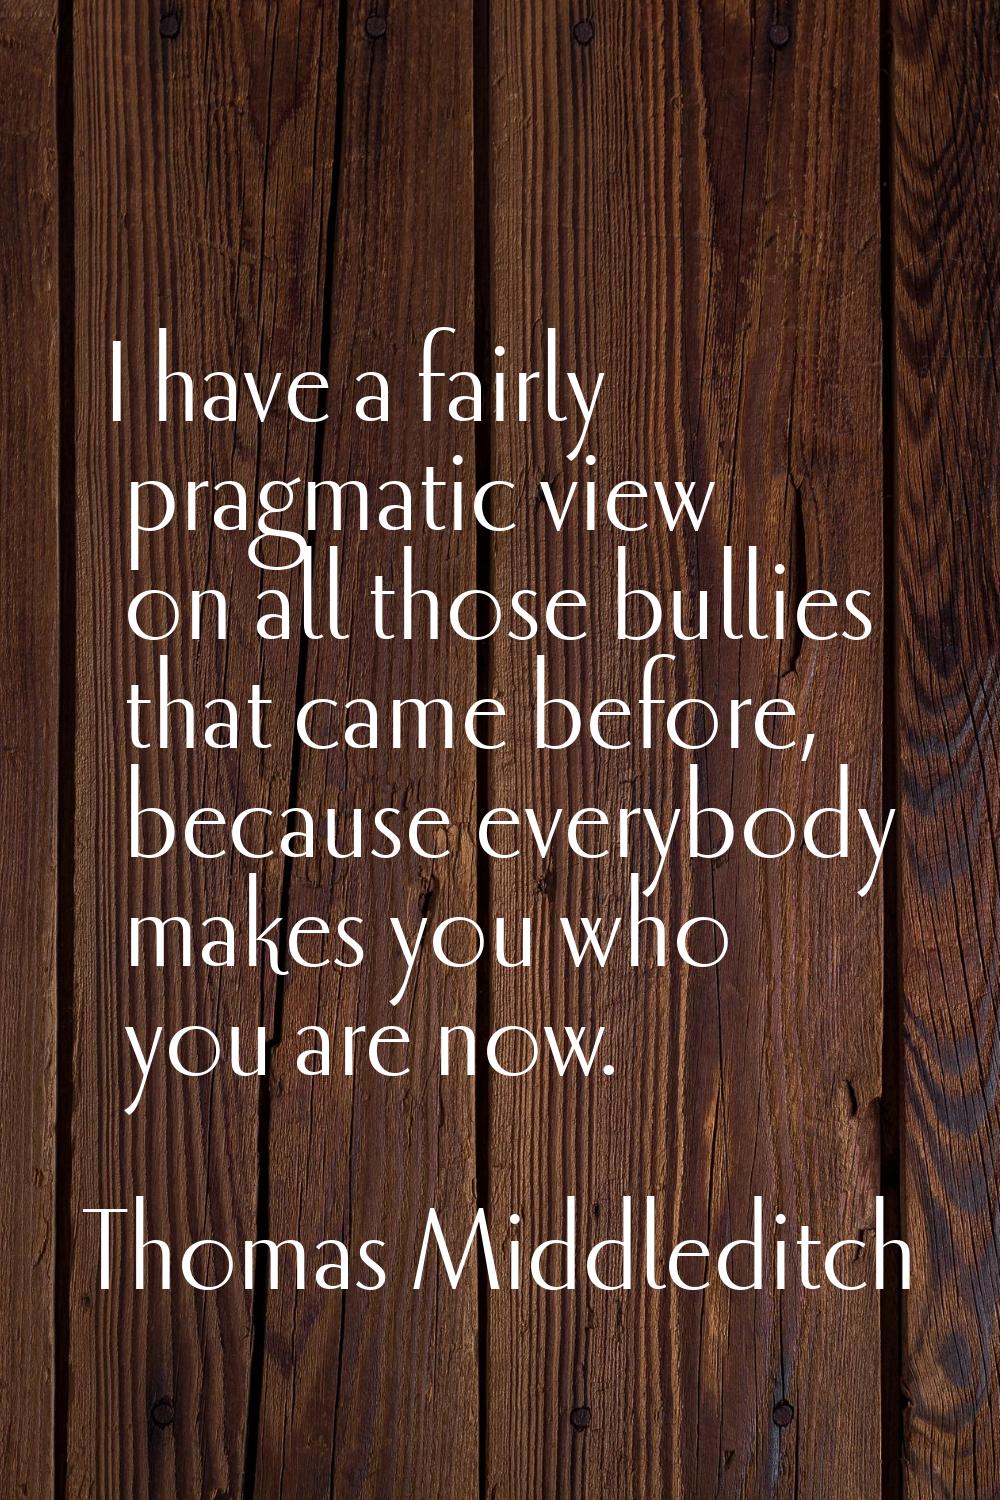 I have a fairly pragmatic view on all those bullies that came before, because everybody makes you w